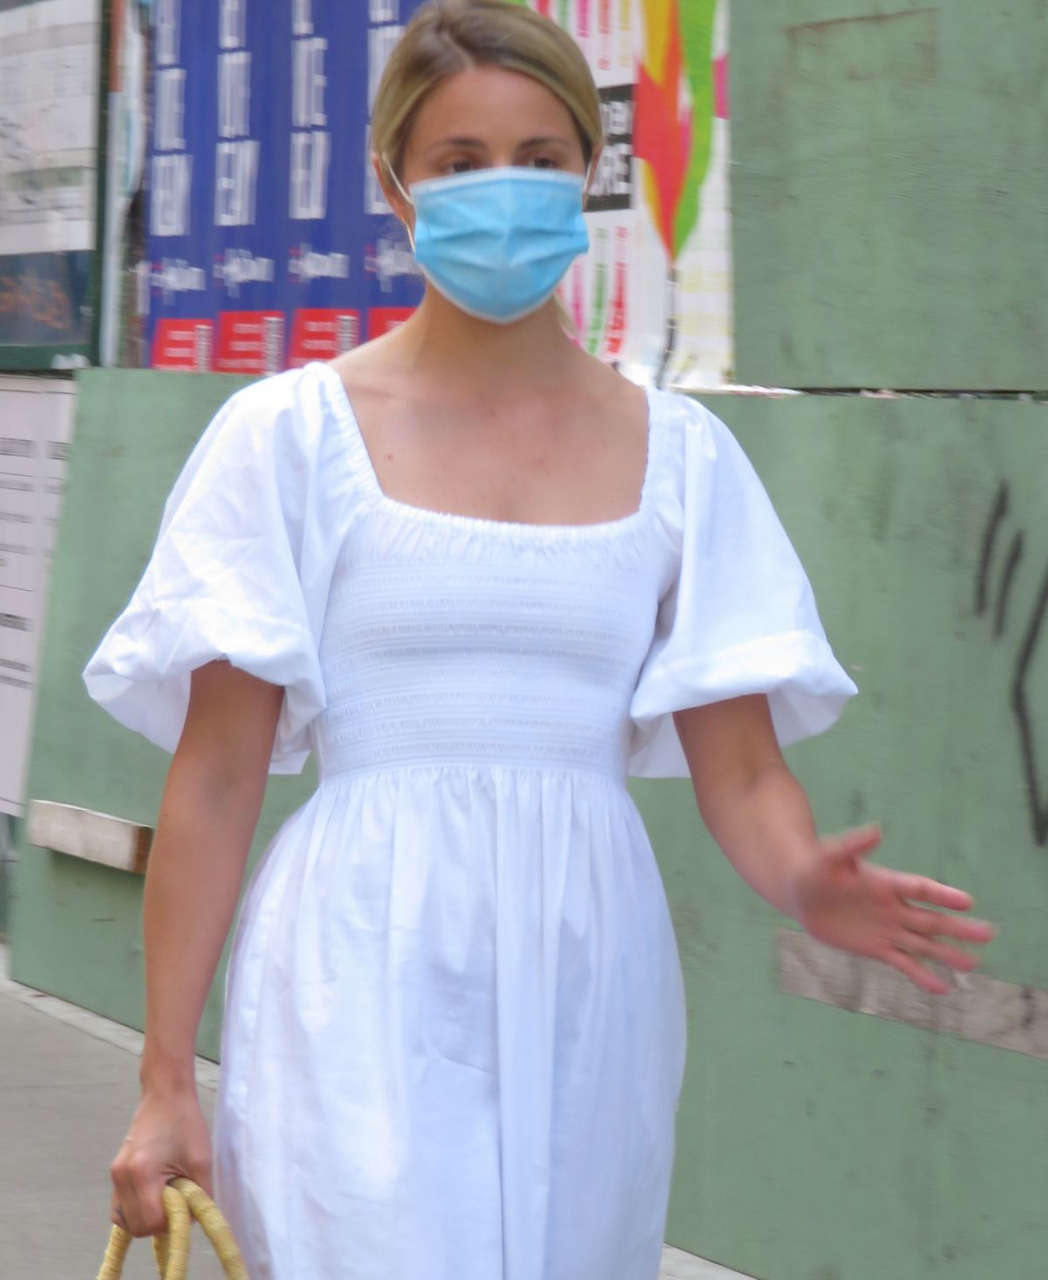 Dianna Agron Wearing Mask Out New York